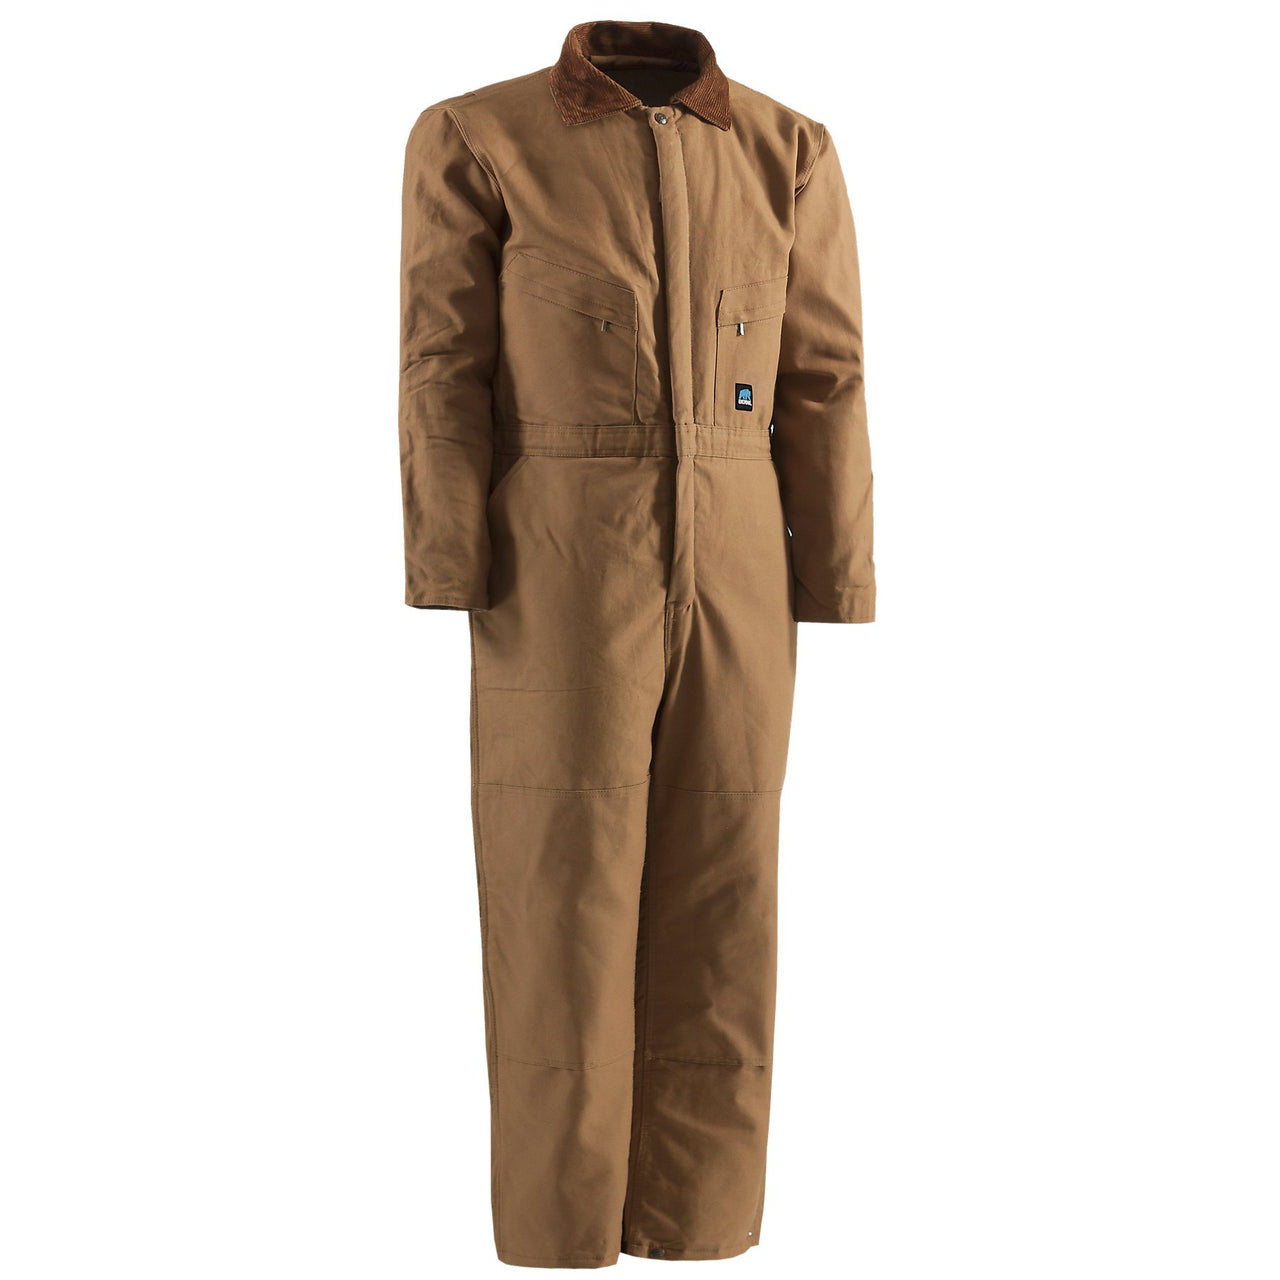 Berne's Youth Washed Insulated Coveralls